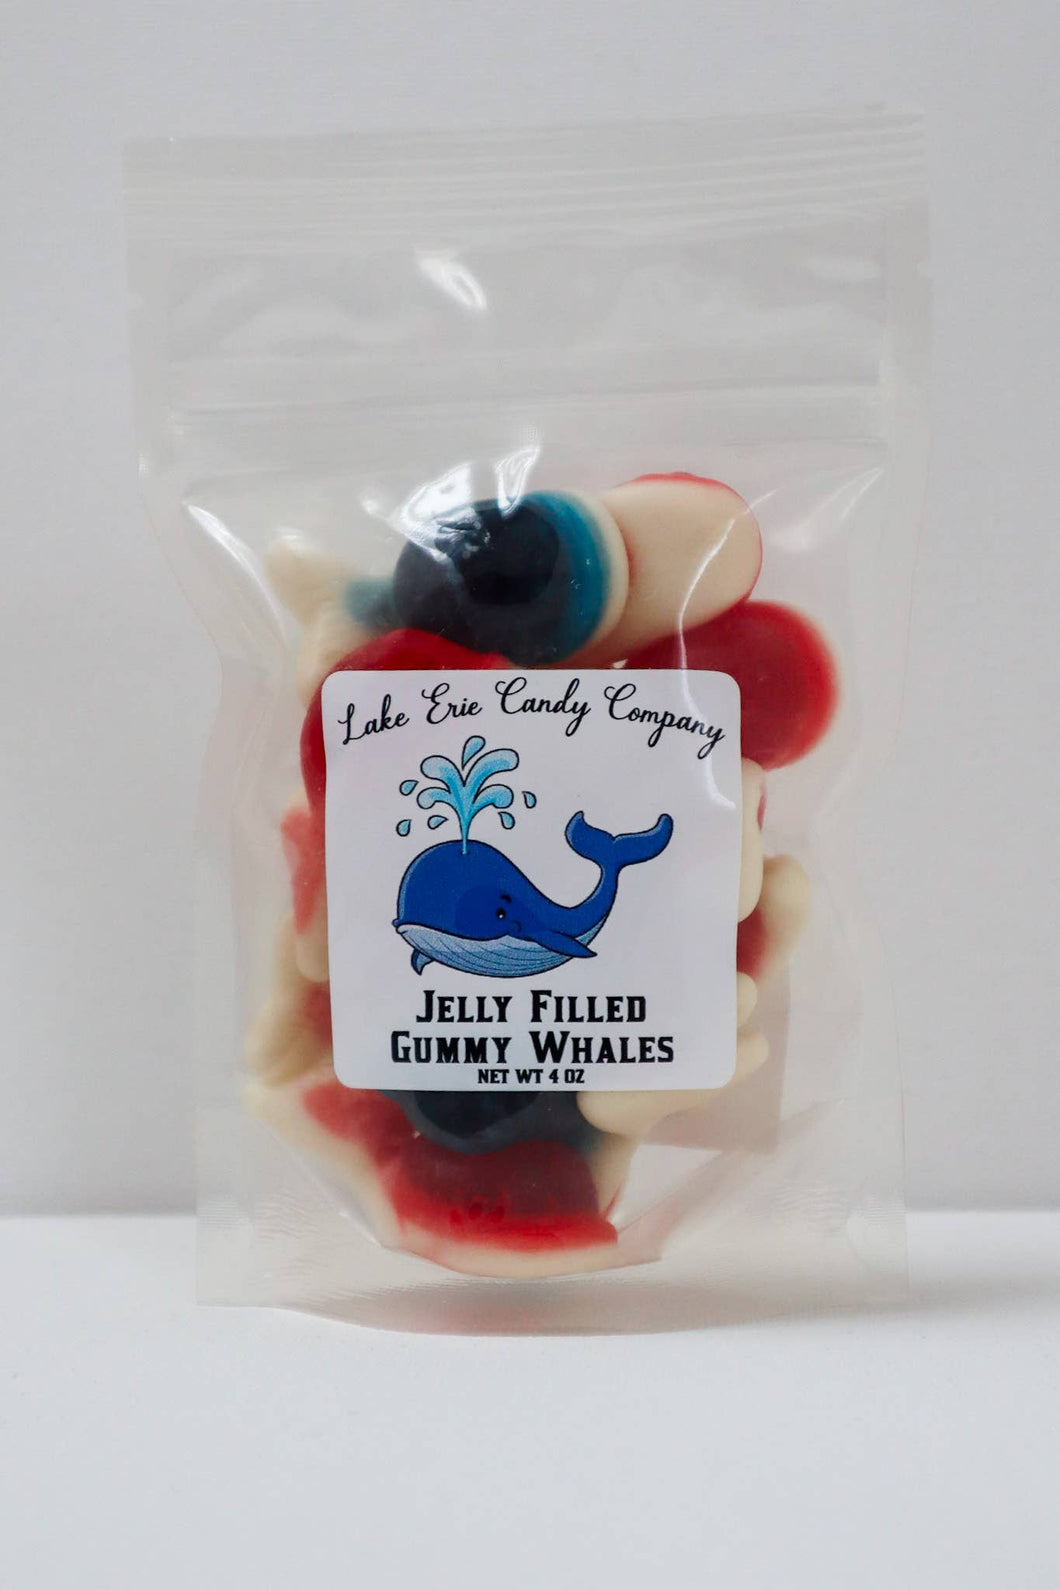 Lake Erie Candy Company - Jelly Filled Gummy Whales